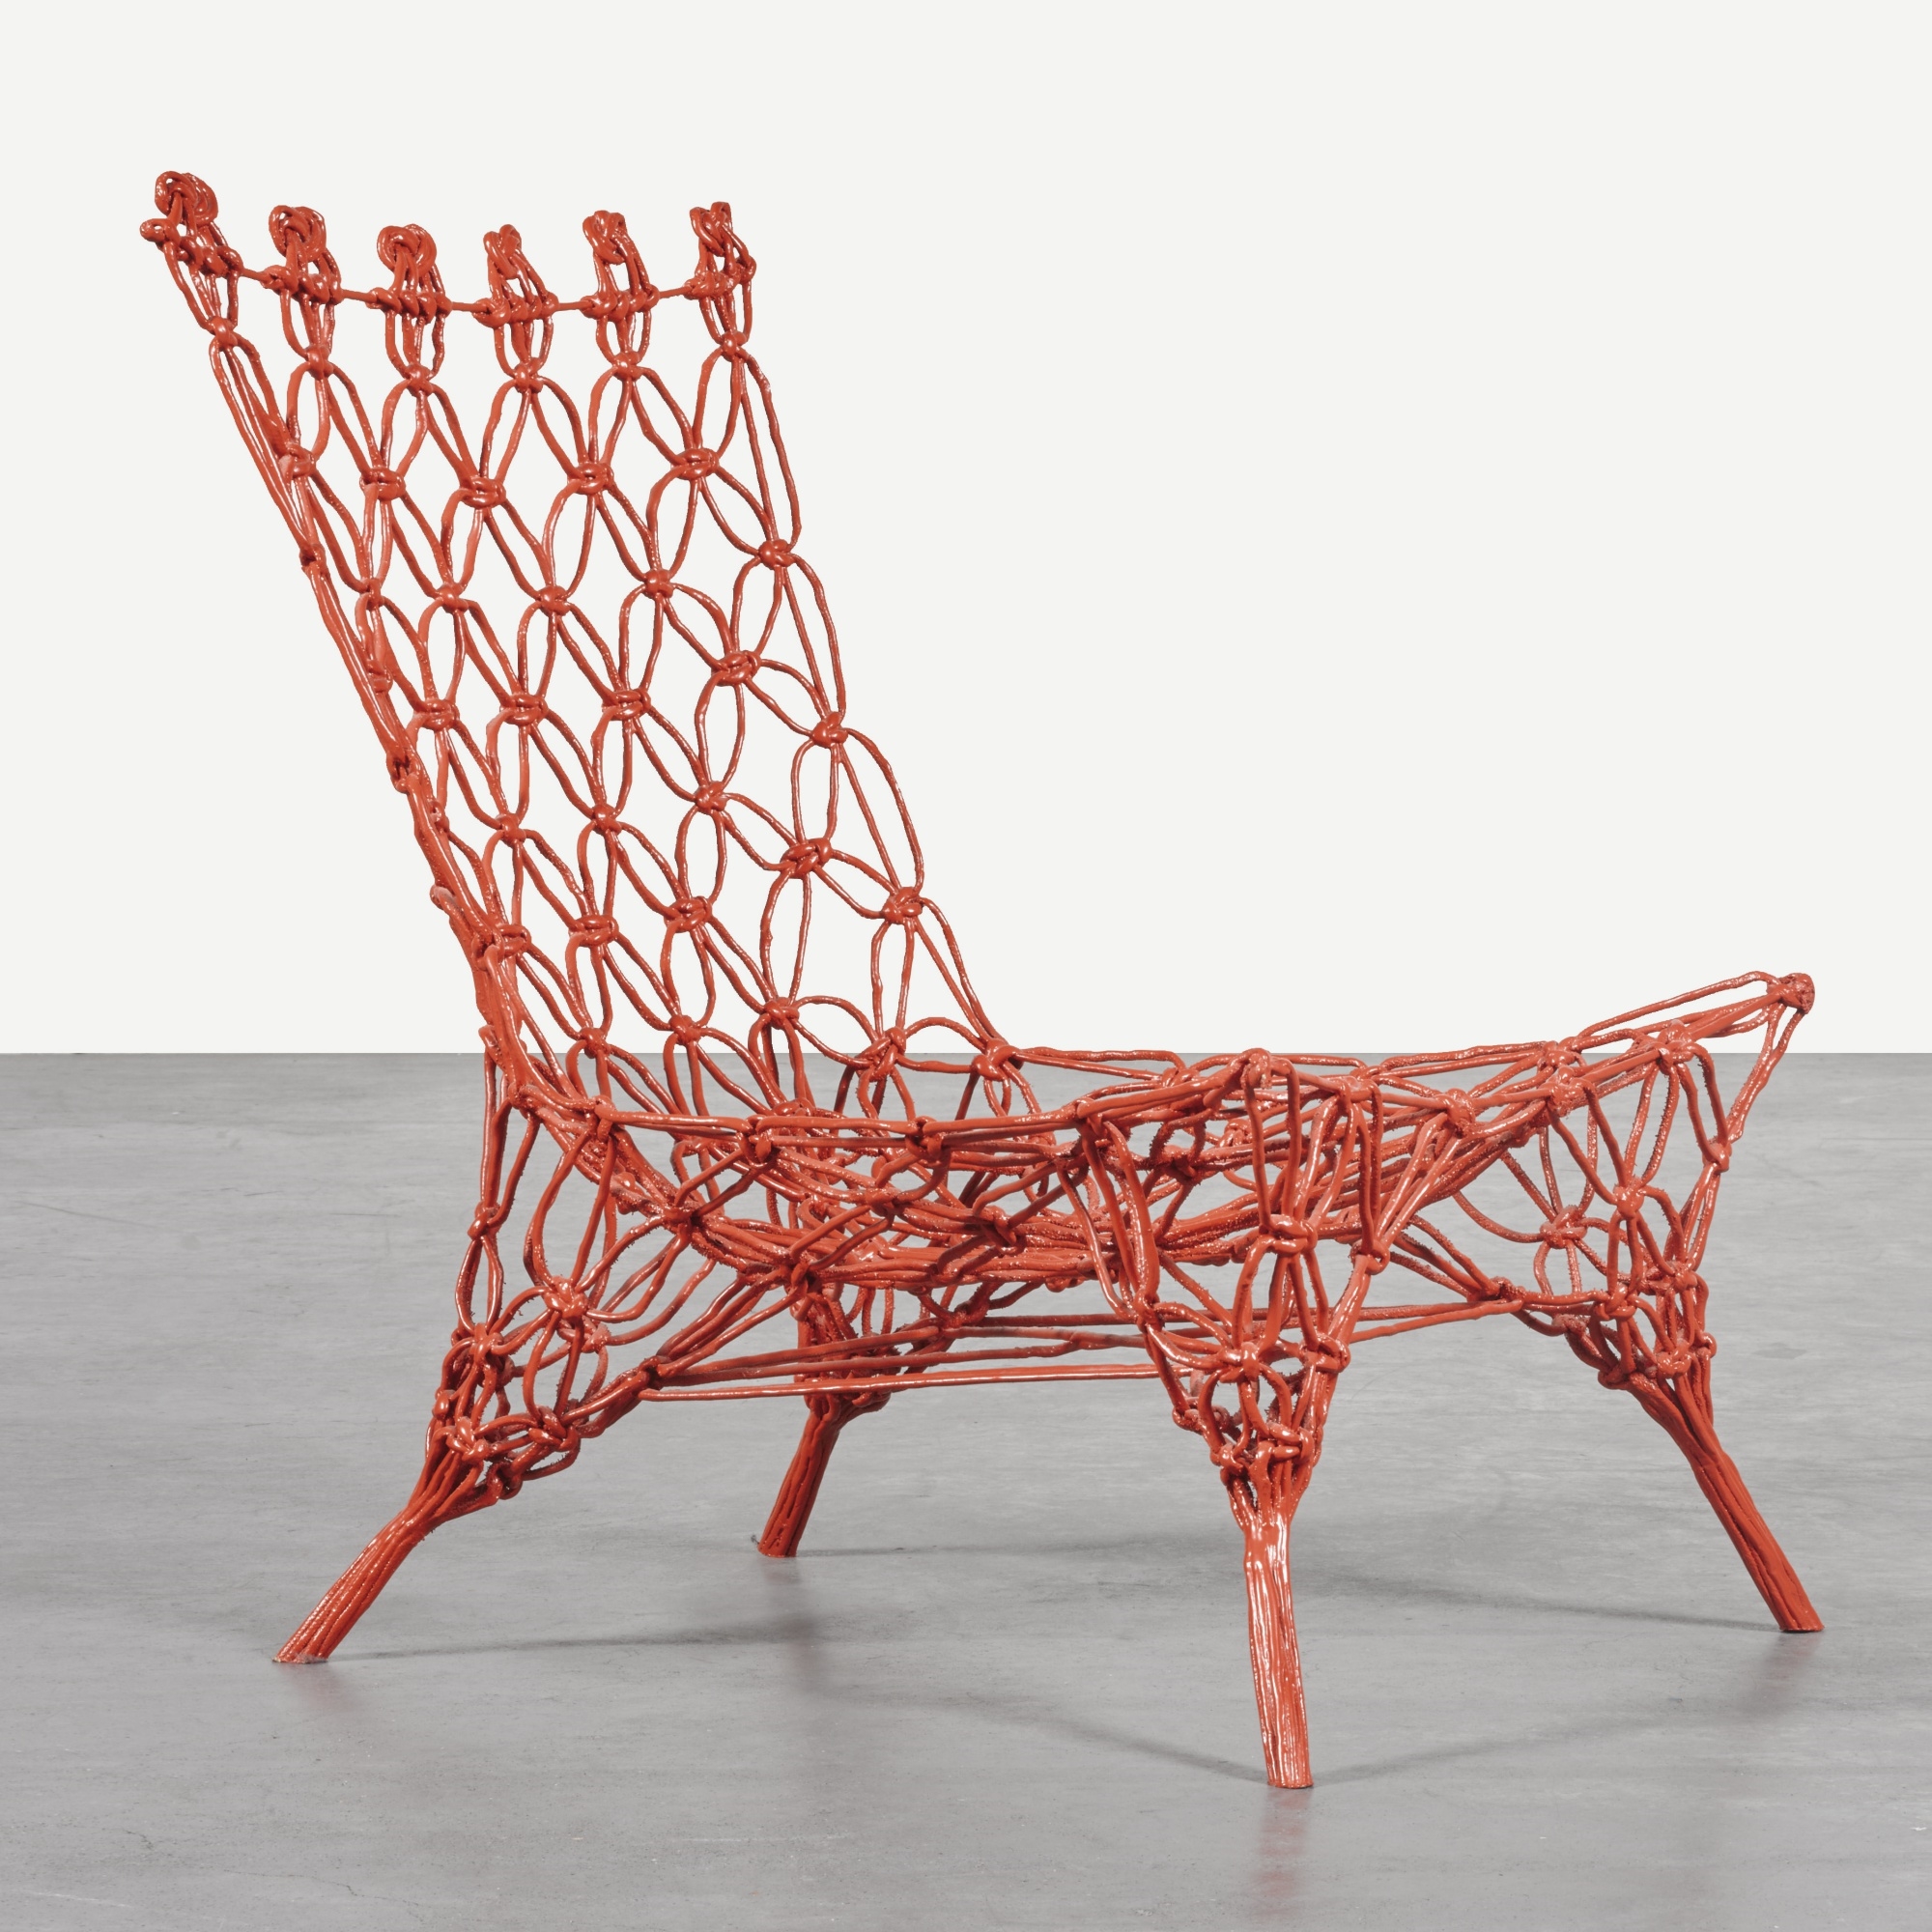 Marcel Wanders, KNOTTED CHAIR (2006)